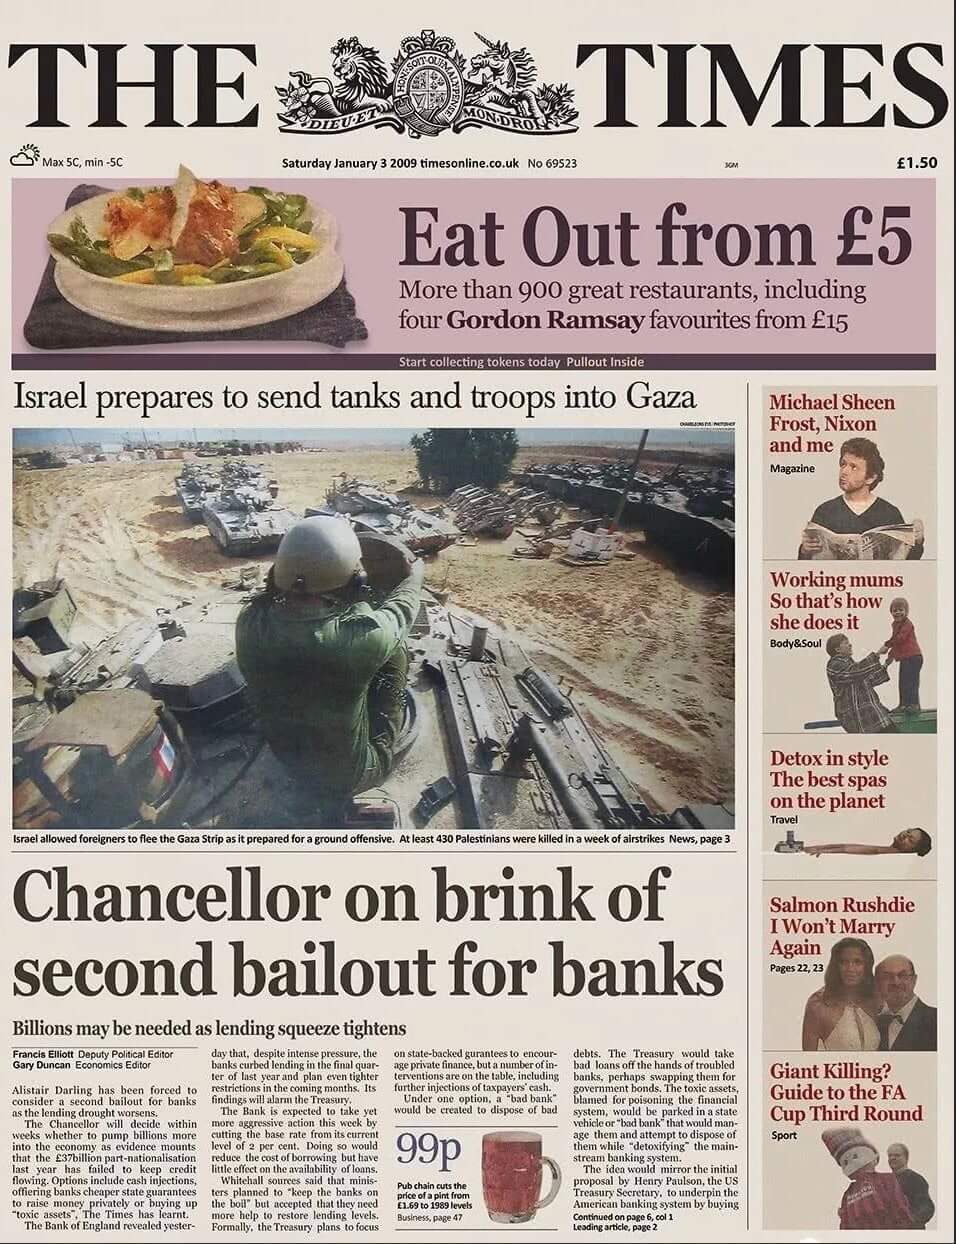 The Times Chancellor on Brink Of Second Bailout For Banks